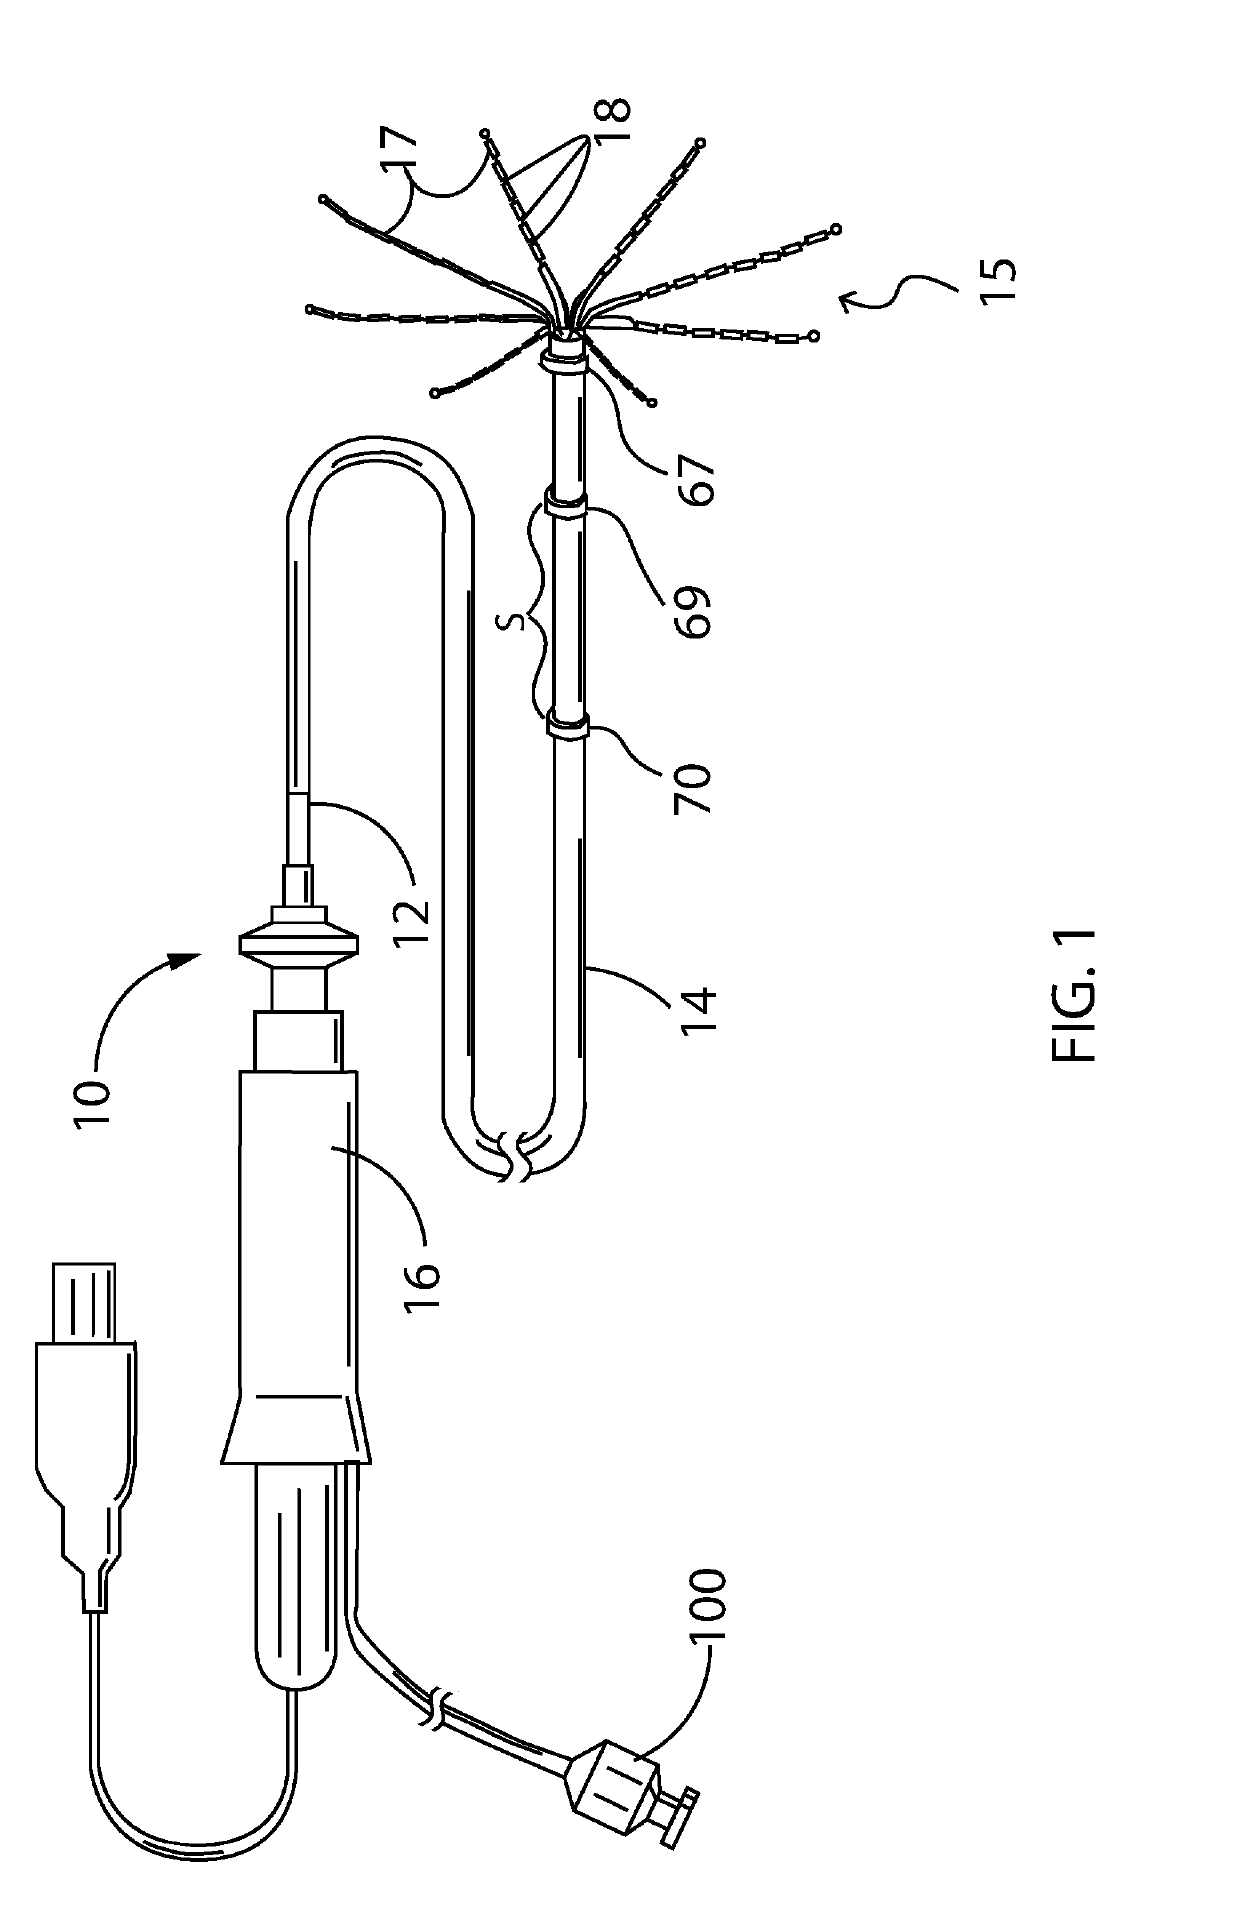 Catheter with staggered electrodes spine assembly